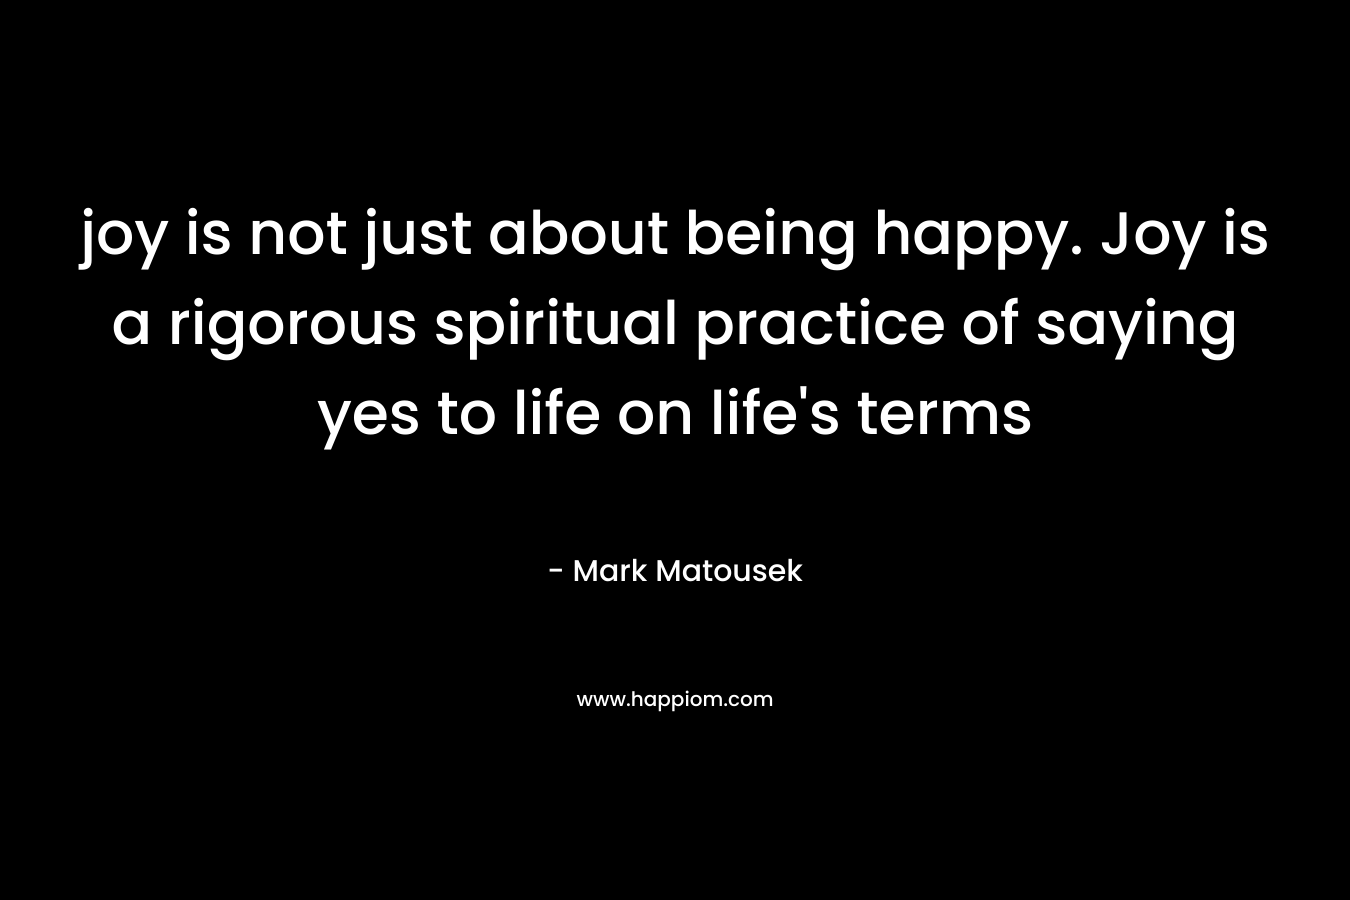 joy is not just about being happy. Joy is a rigorous spiritual practice of saying yes to life on life’s terms – Mark Matousek